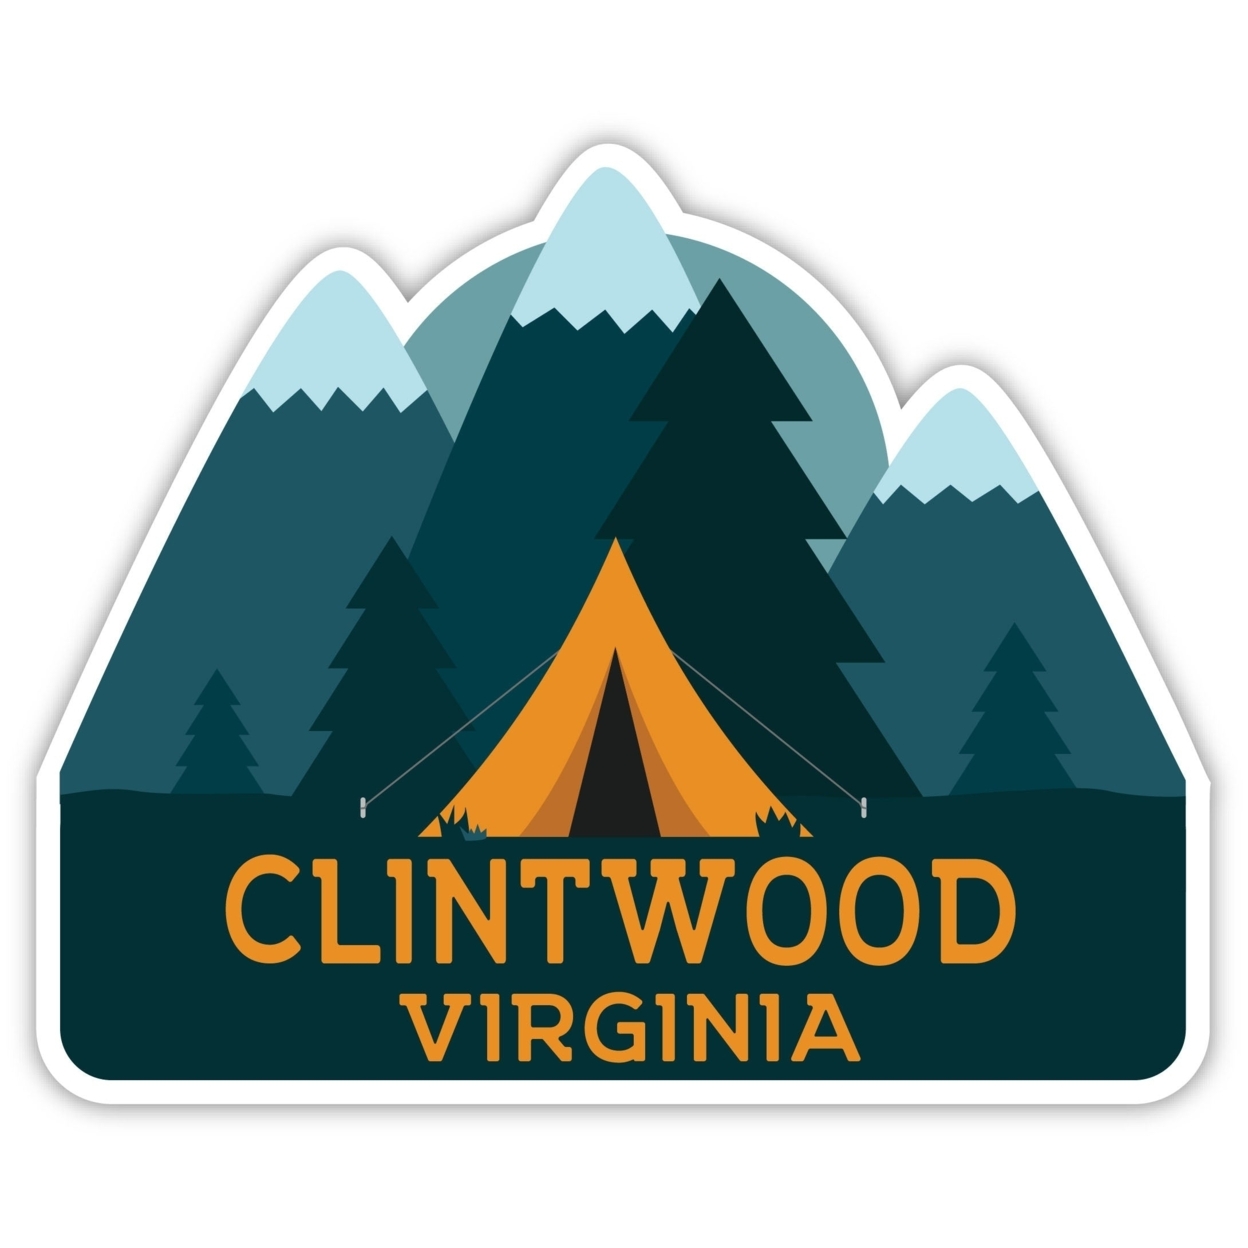 Clintwood Virginia Souvenir Decorative Stickers (Choose Theme And Size) - 4-Pack, 6-Inch, Tent